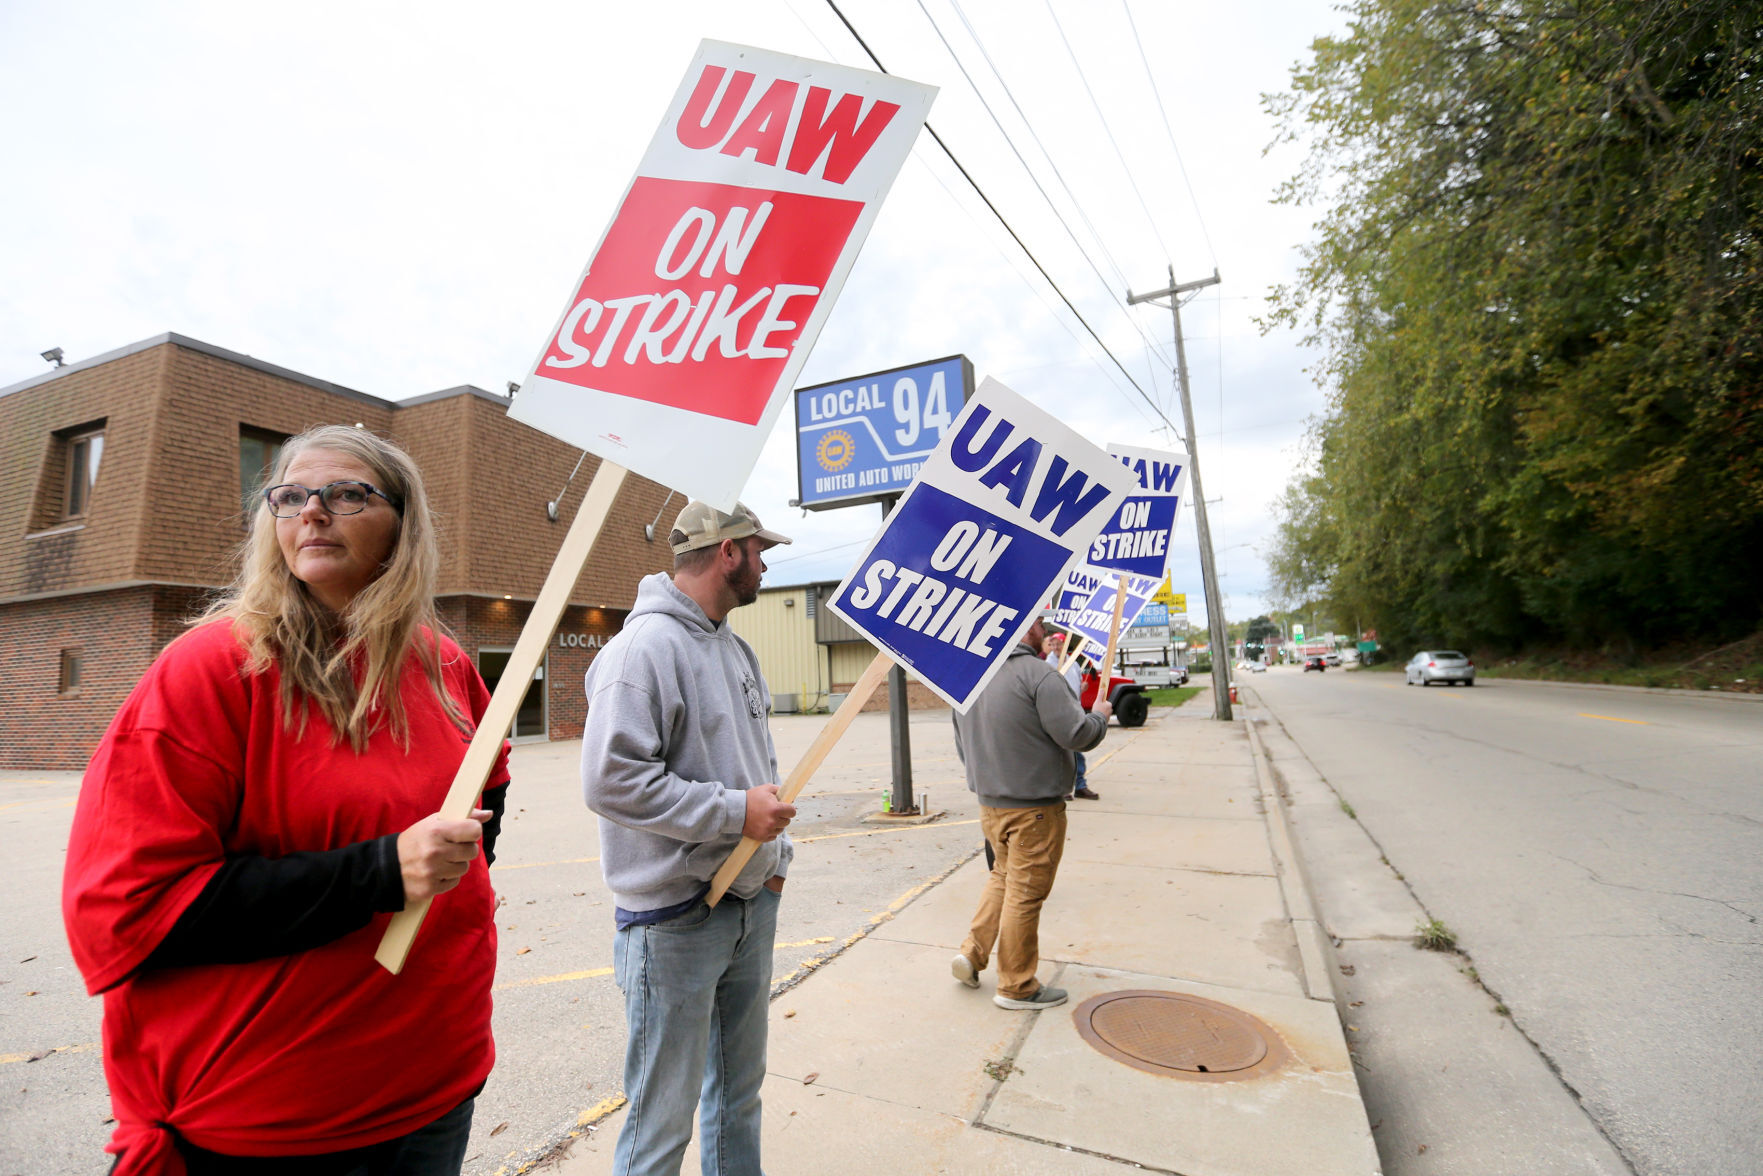 John Deere Dubuque Works union employees Theresa Pooley (left) and Jason Parisi picket outside UAW Local 94 in Dubuque on Thursday, Oct. 14, 2021.    PHOTO CREDIT: JESSICA REILLY